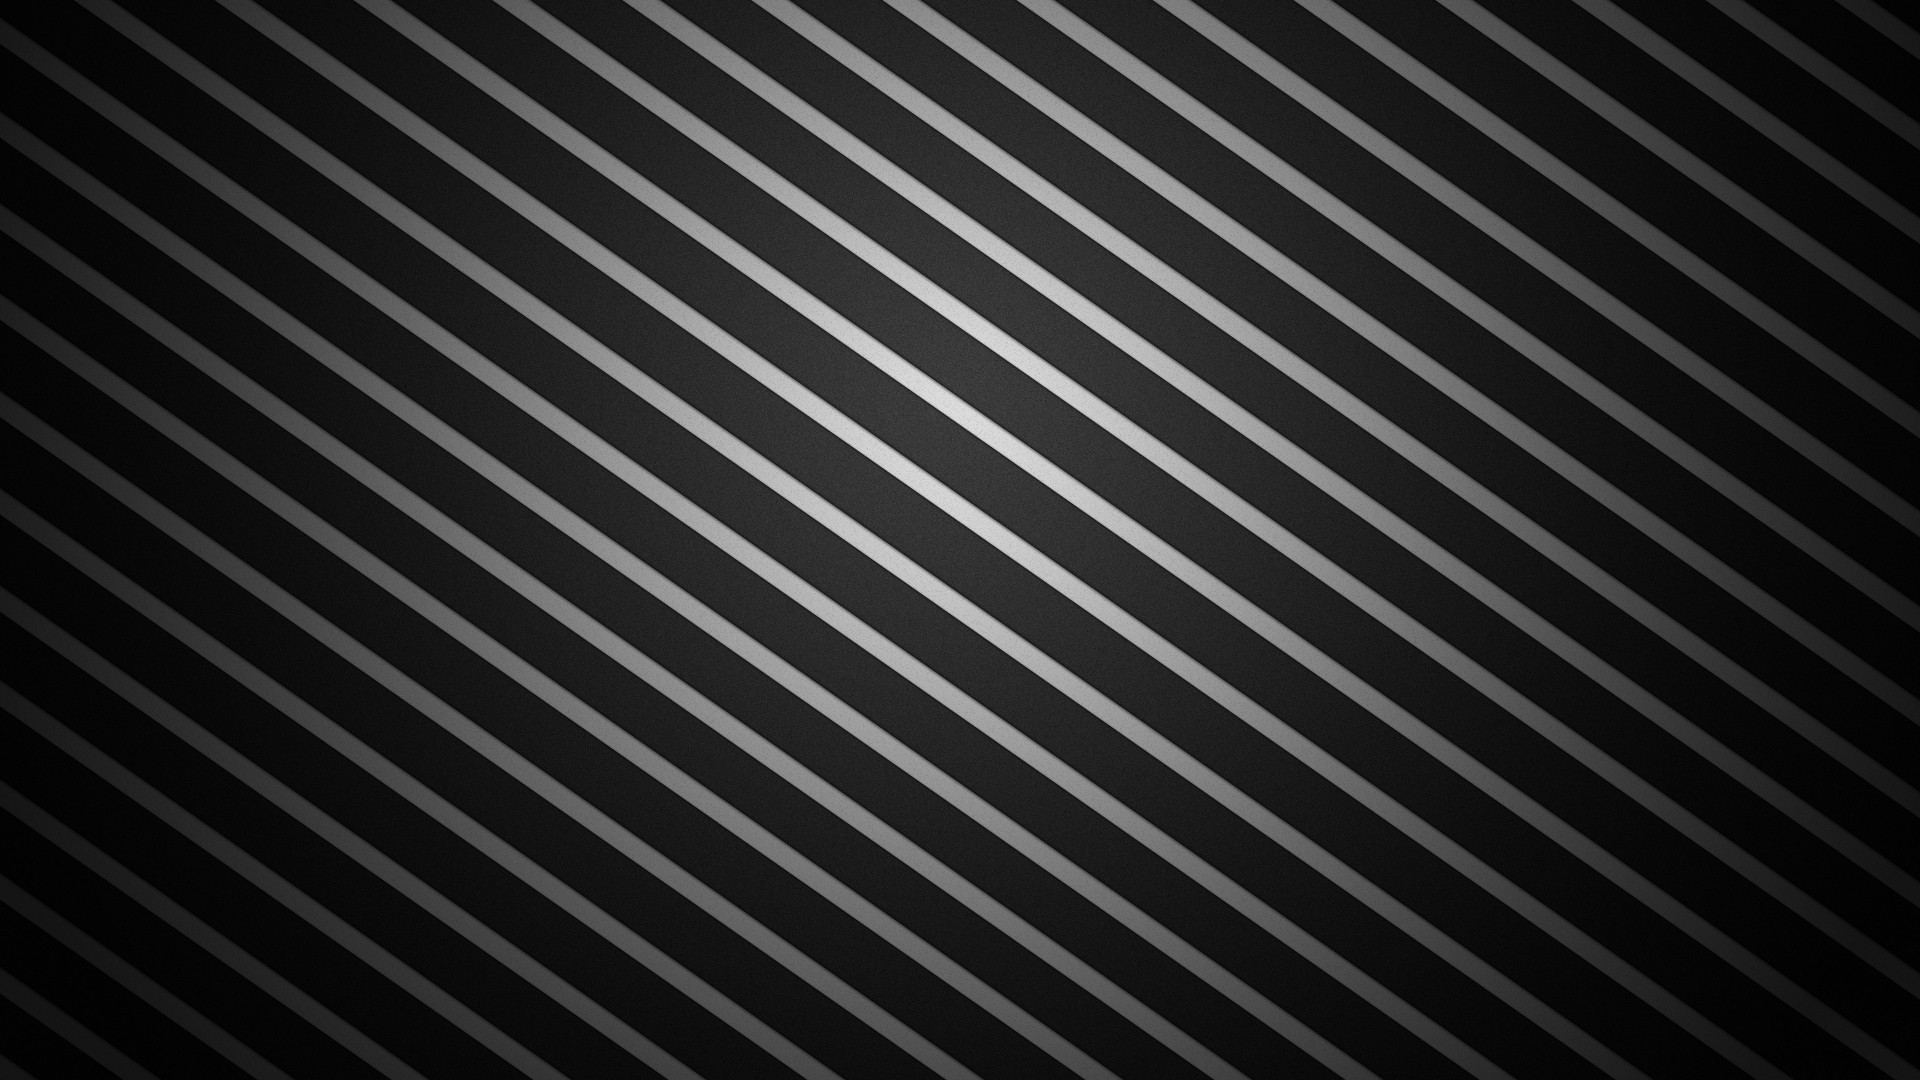 abstract black wallpapers wallpaper images 1920x1080